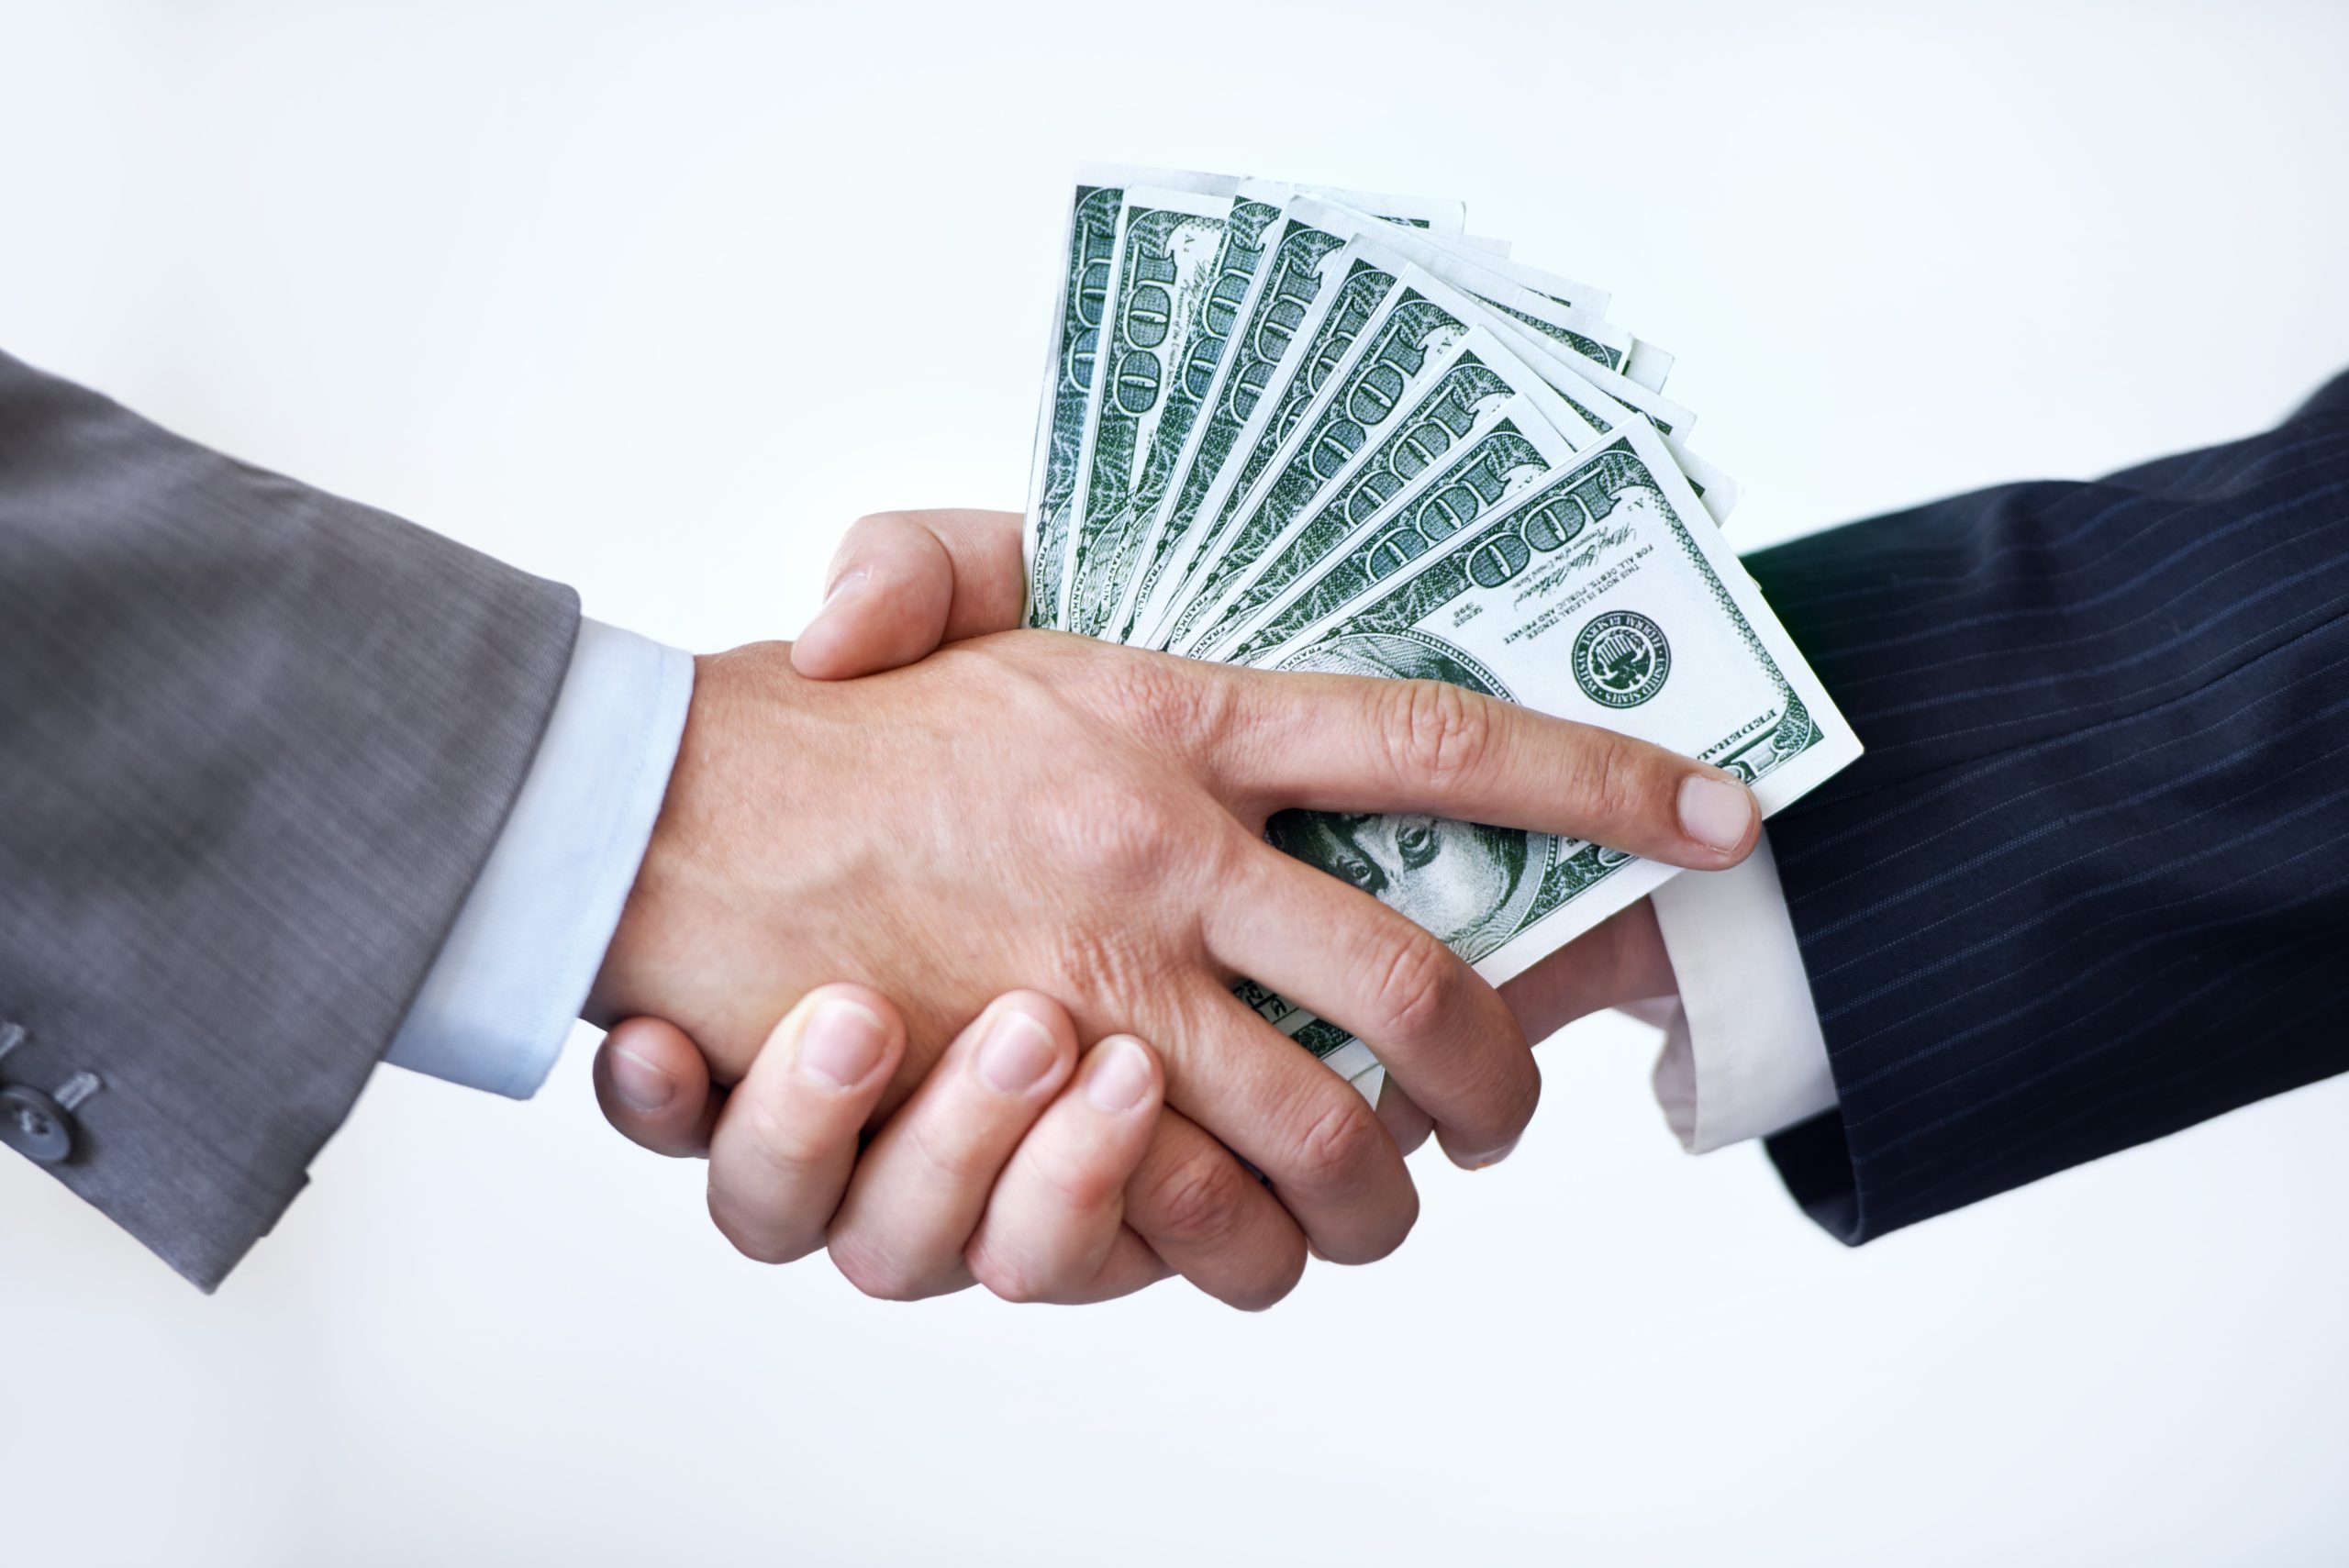 Studio shot of two men shaking hands after making a monetary deal